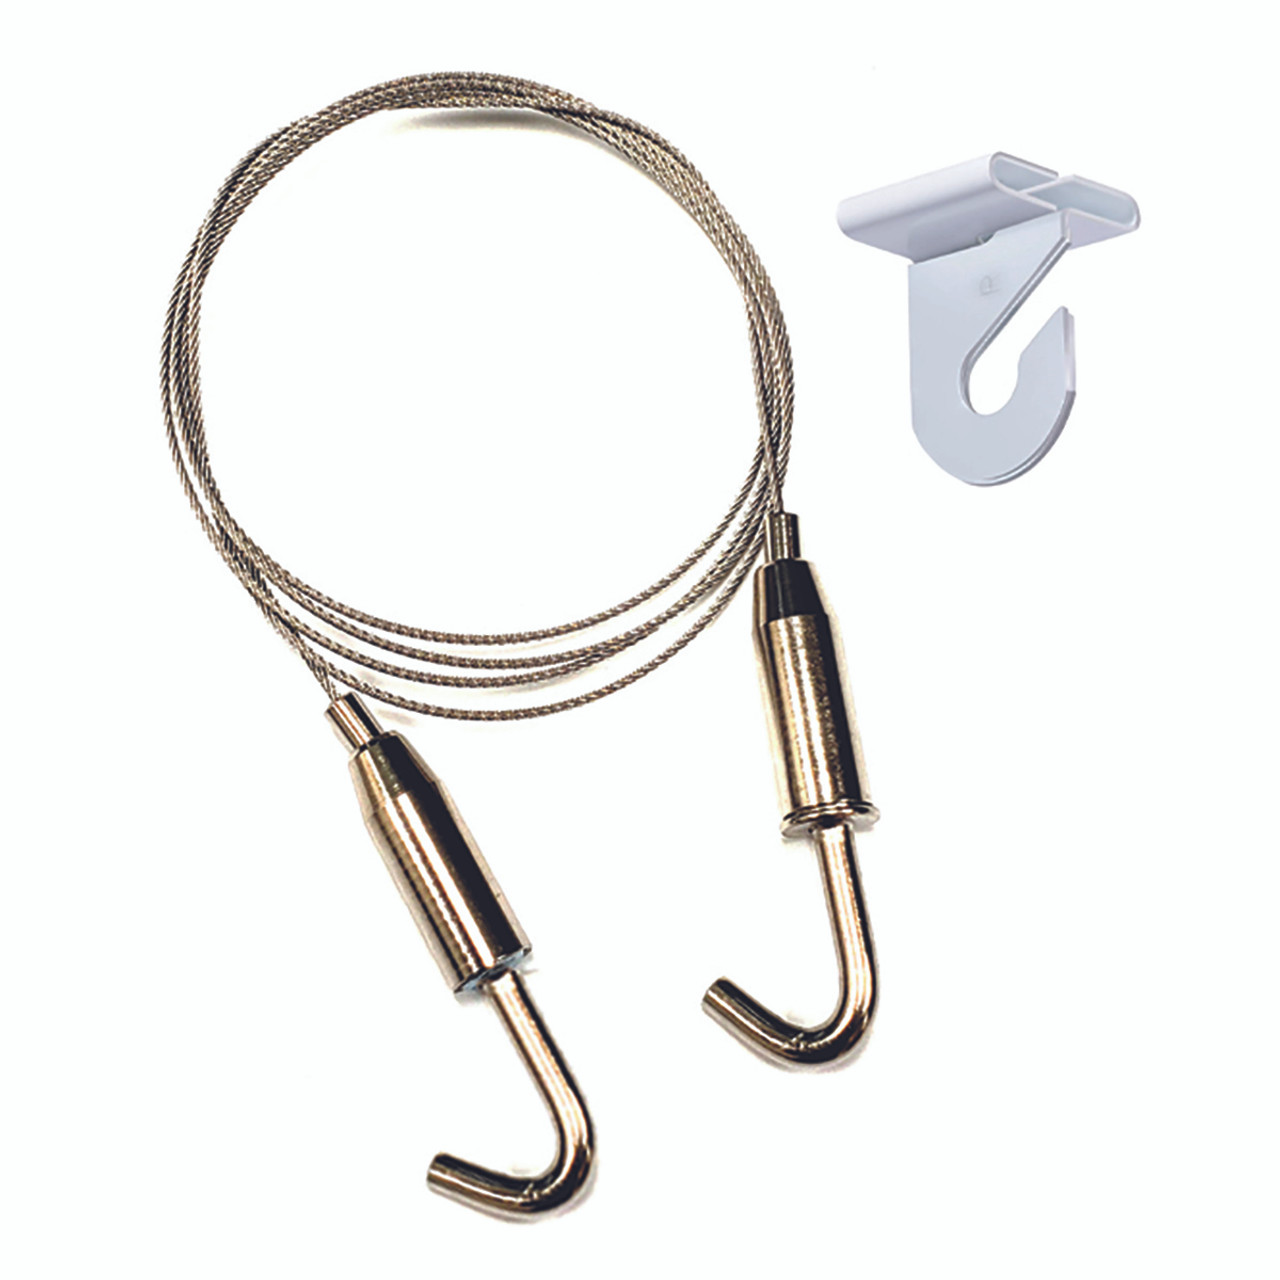 Ceiling Suspended Cable Kit w/ Hook & Slide Clamp